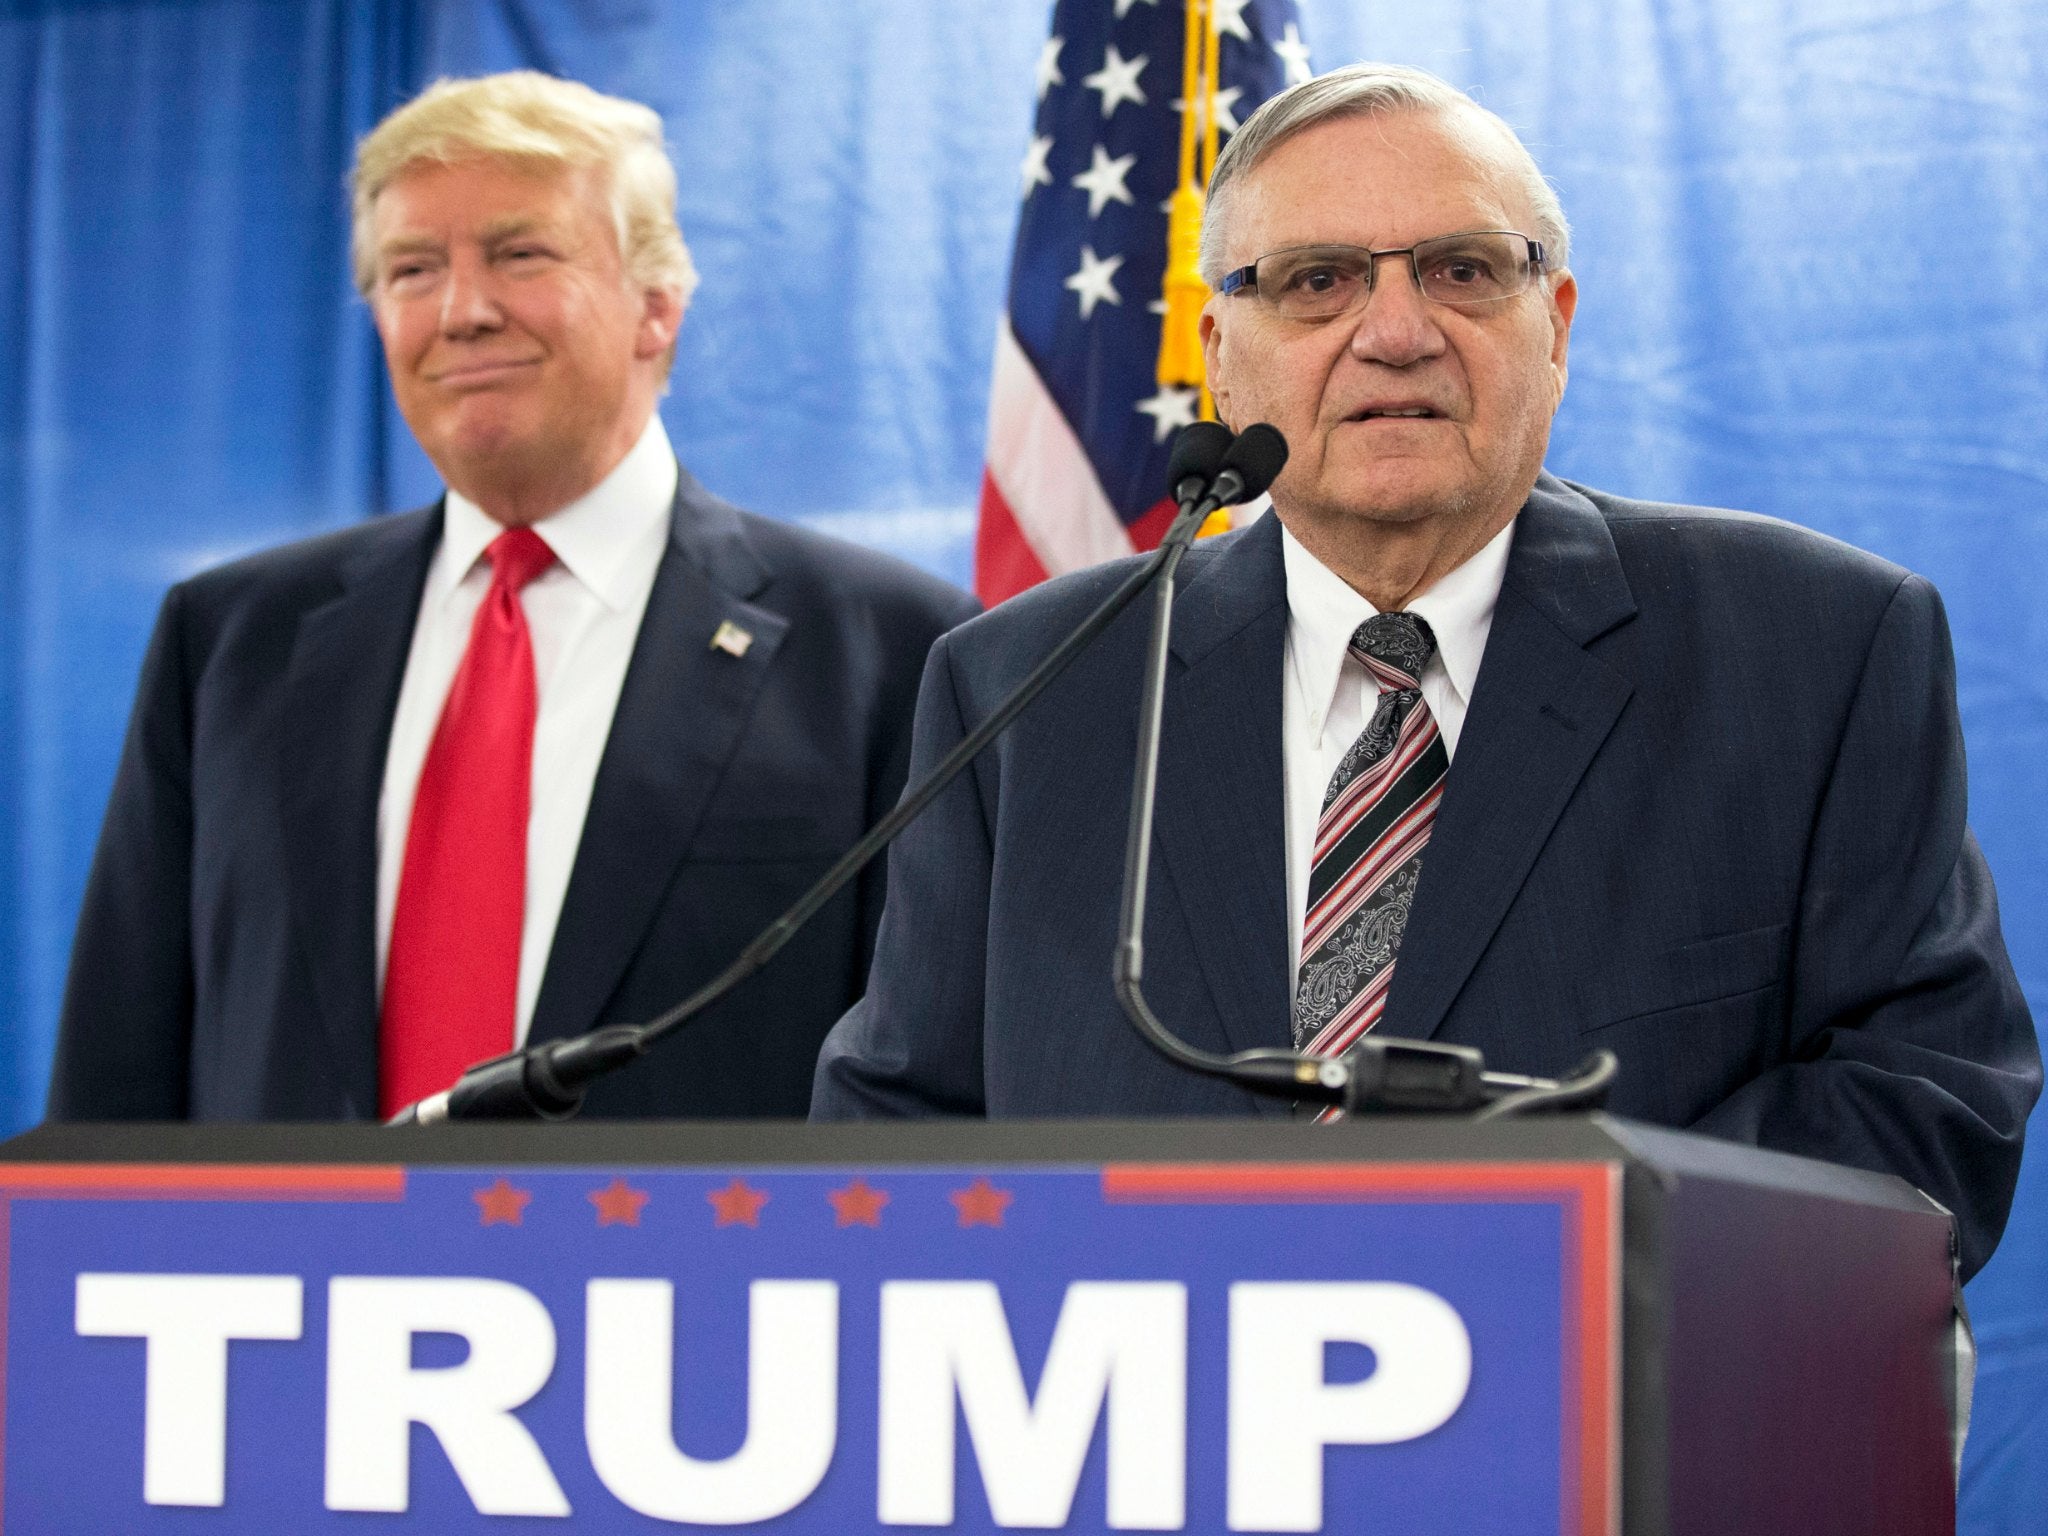 Mr Trump and Mr Arpaio became close on the 2016 campaign trail